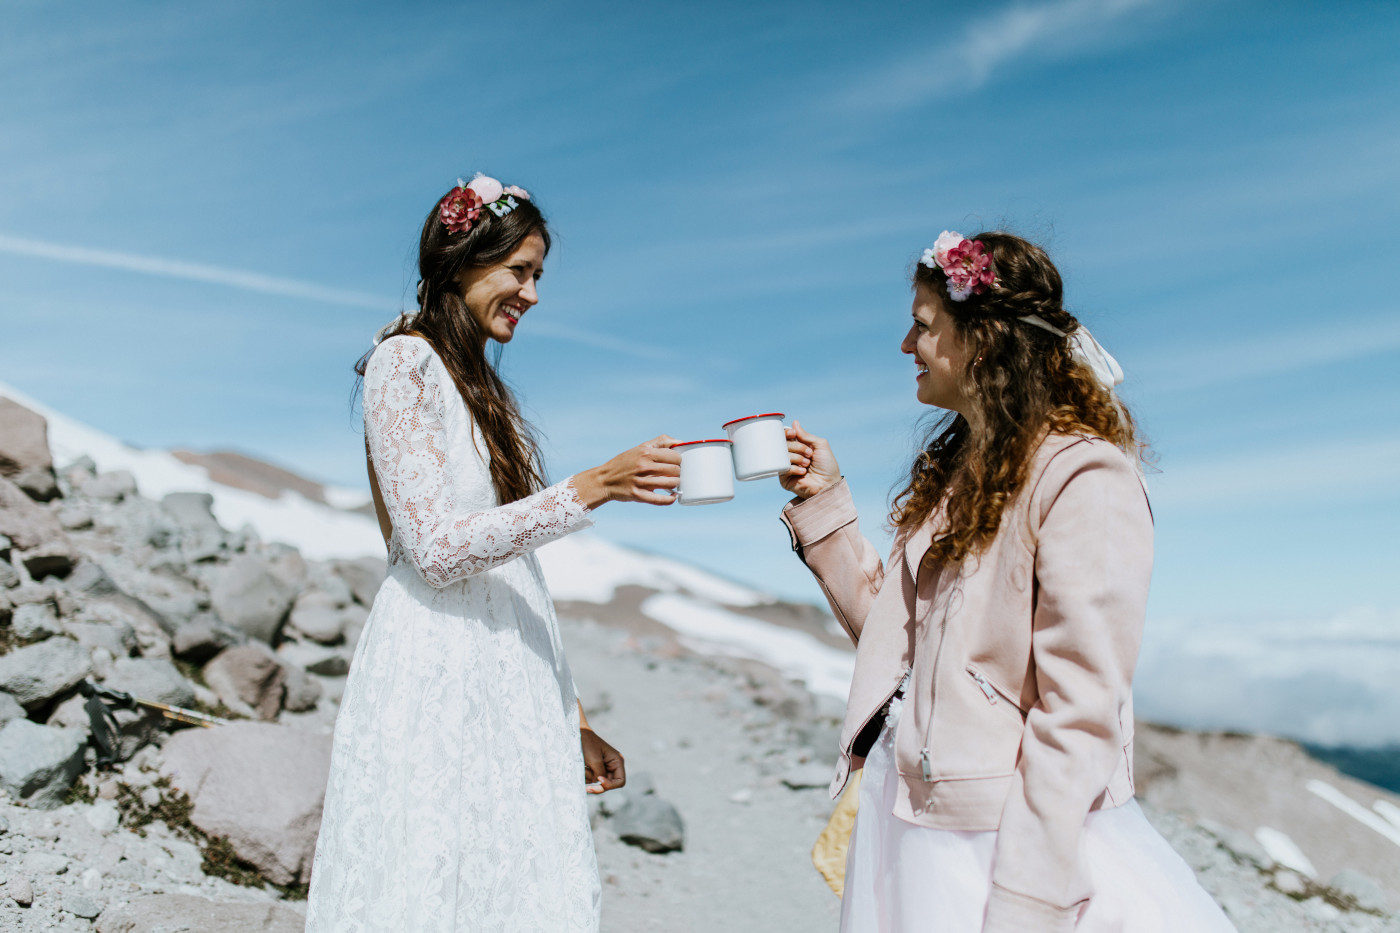 Margaux and Heather cheers with champagne atop Mount Hood during their elopement. Elopement photography at Mount Hood by Sienna Plus Josh.